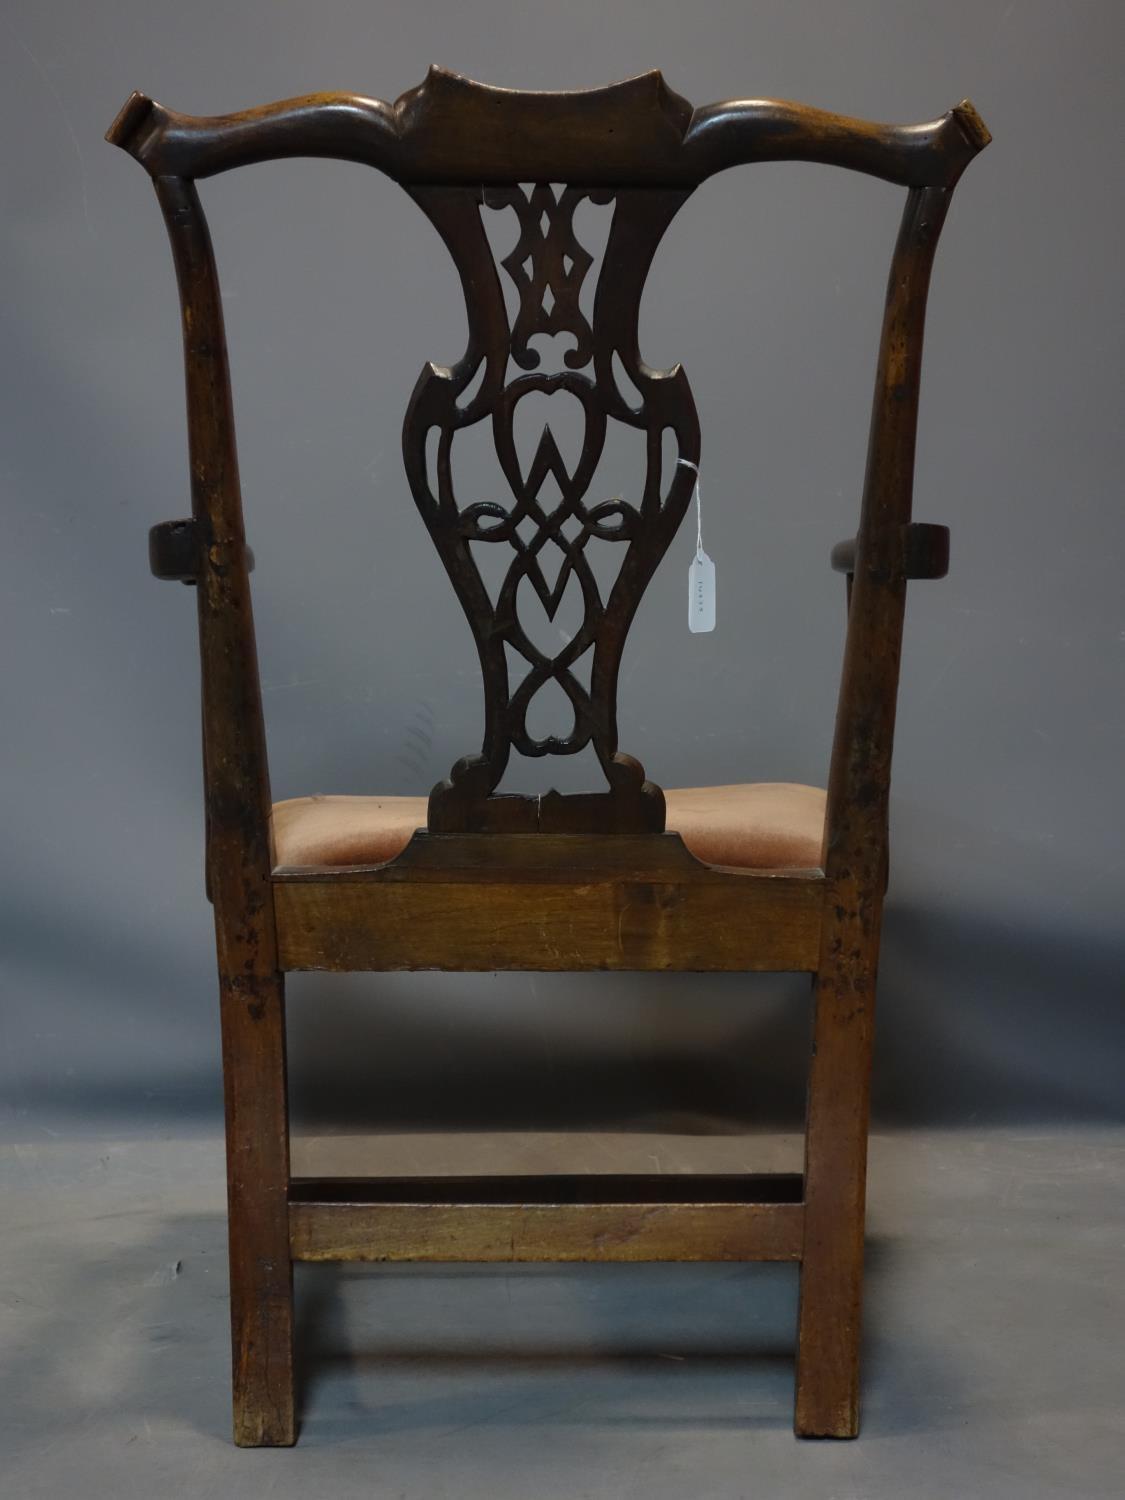 A 19th century Chippendale style mahogany carver chair - Image 3 of 3